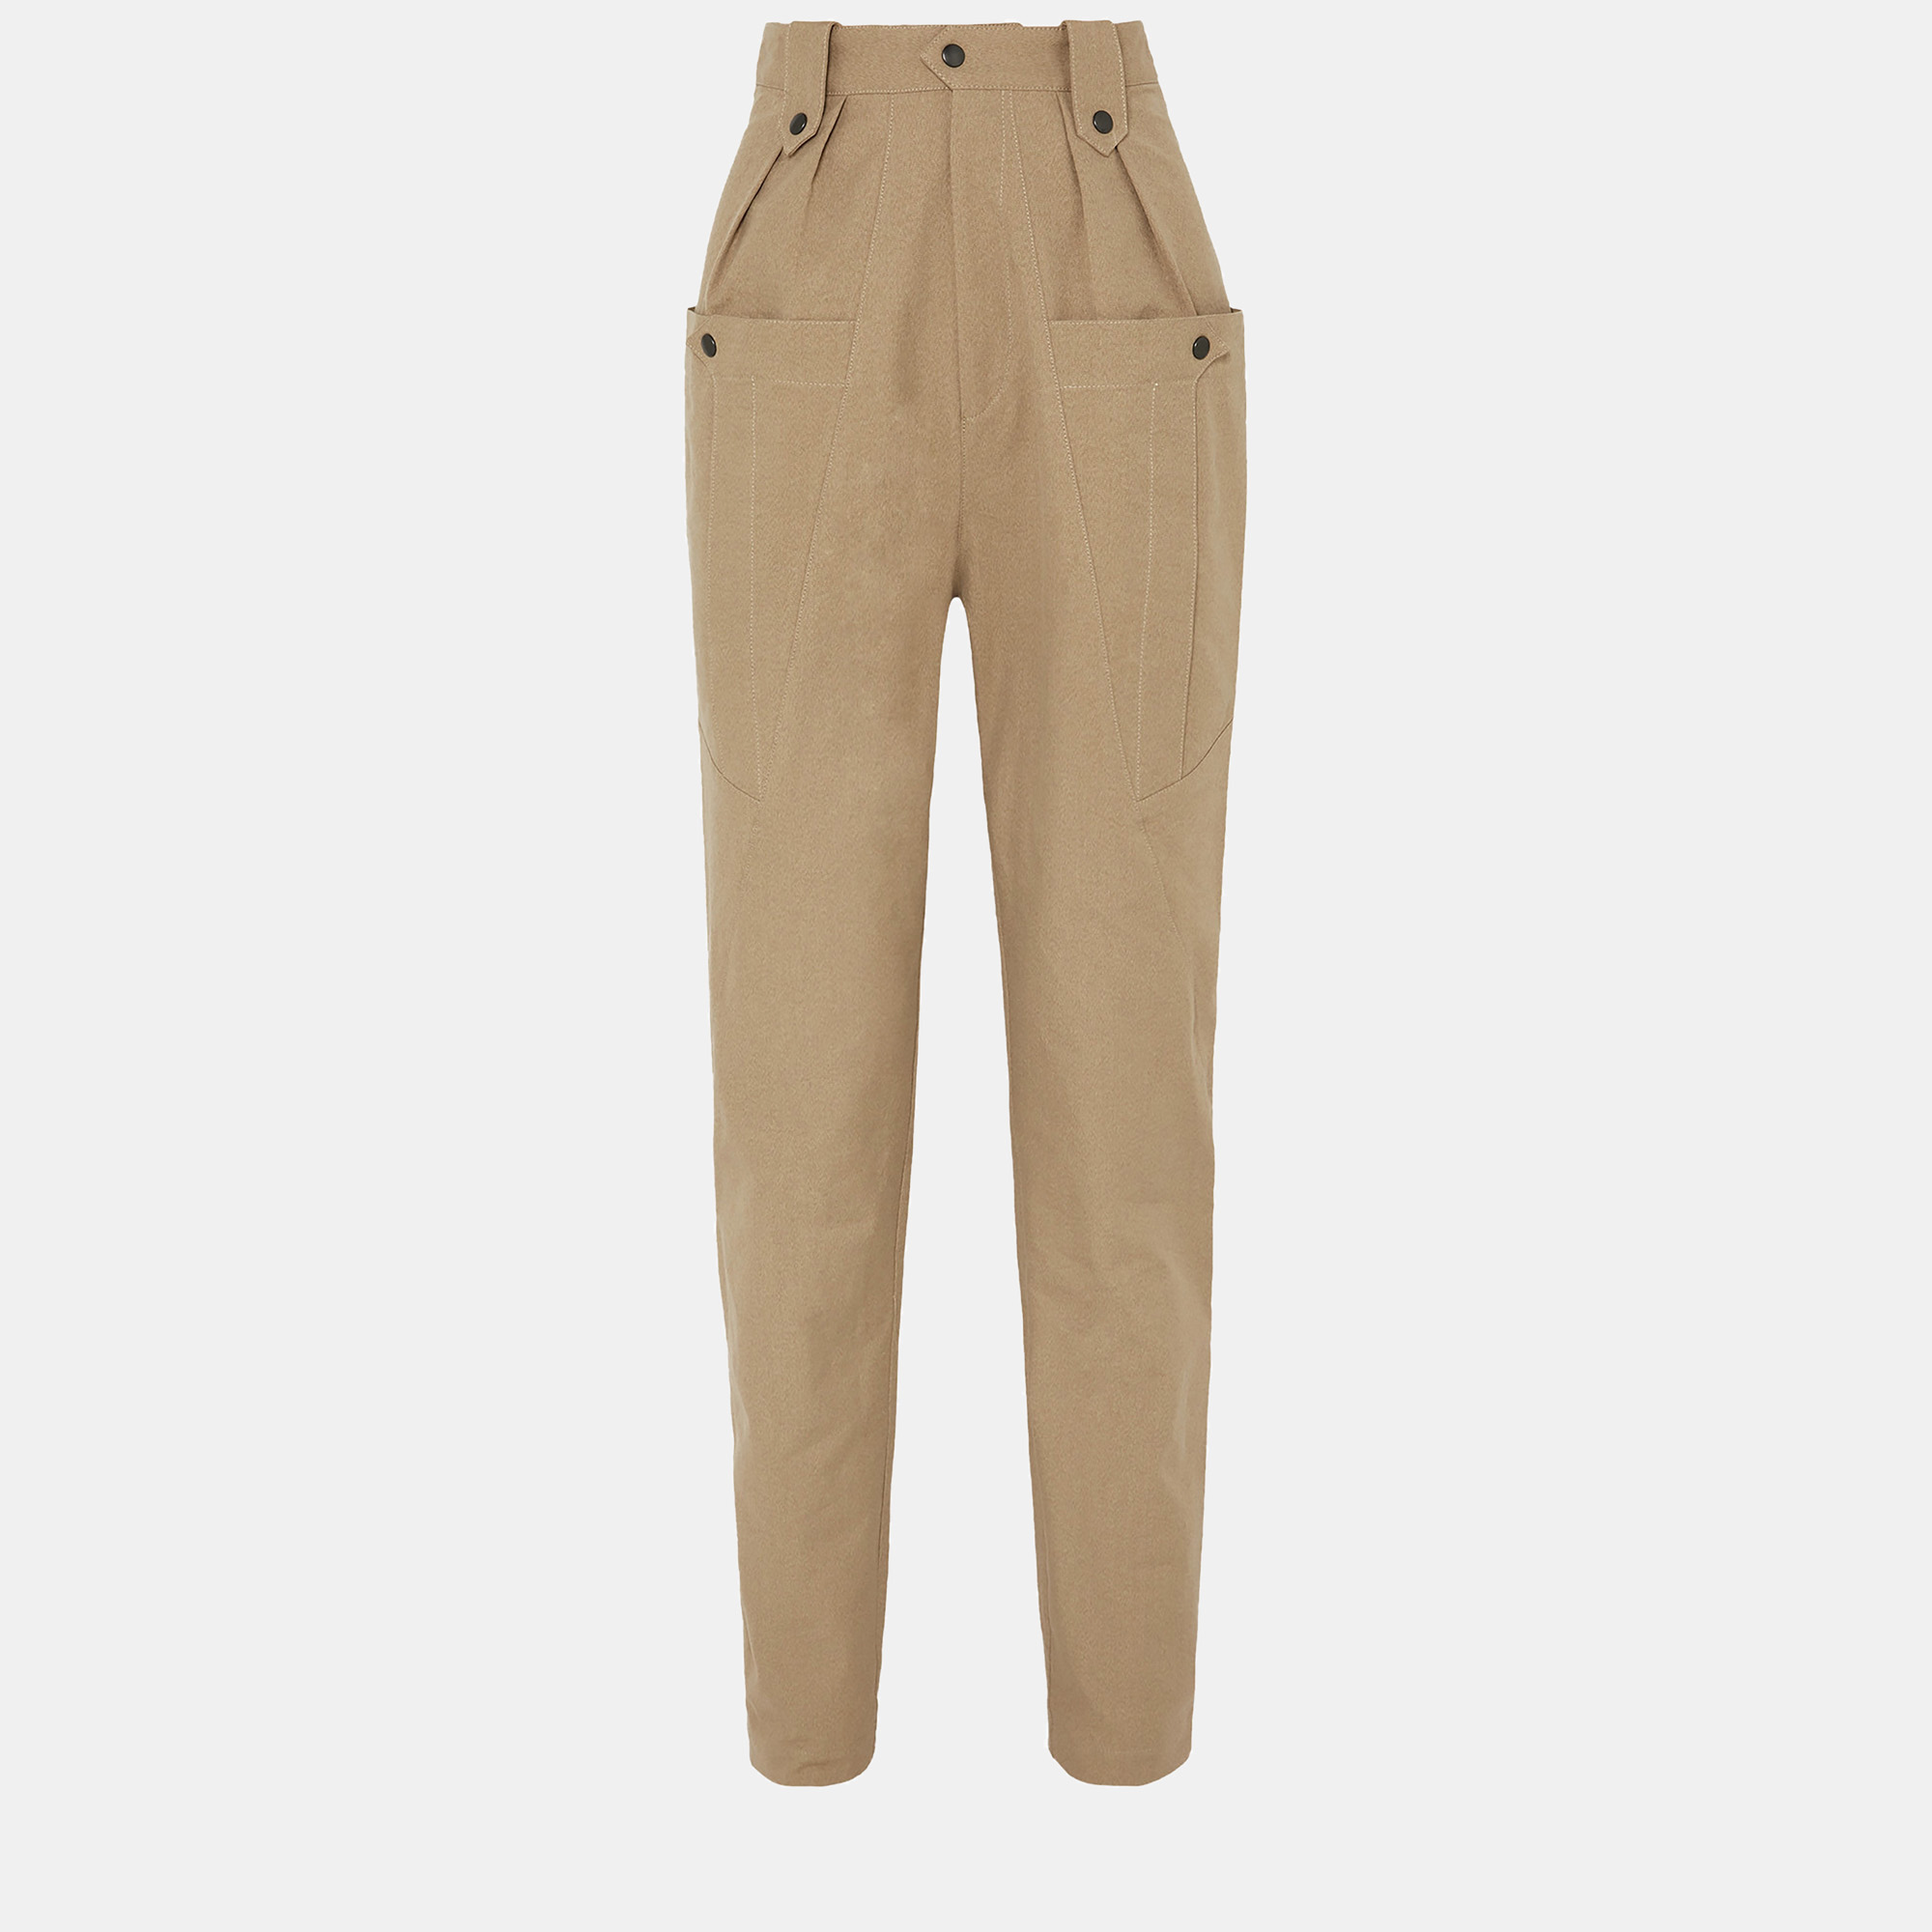 Isabel marant brown cotton tapered pants size 42